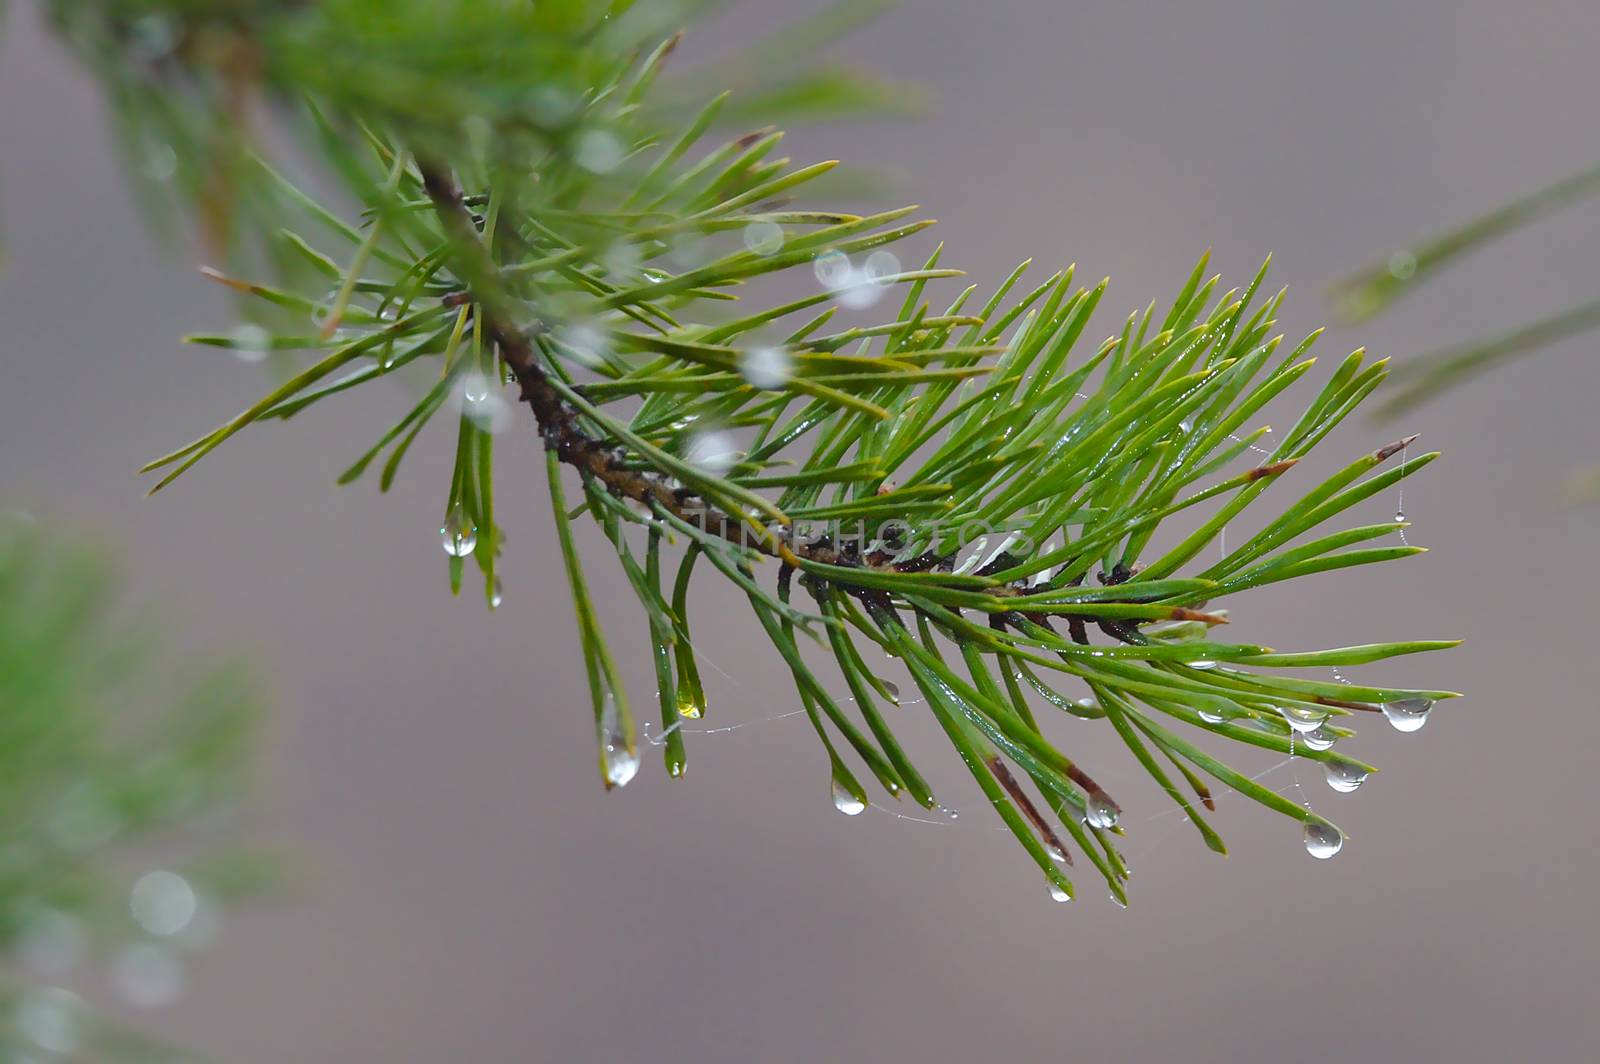 One evergreen branch in early morning with condensate water drops on smooth blurred background